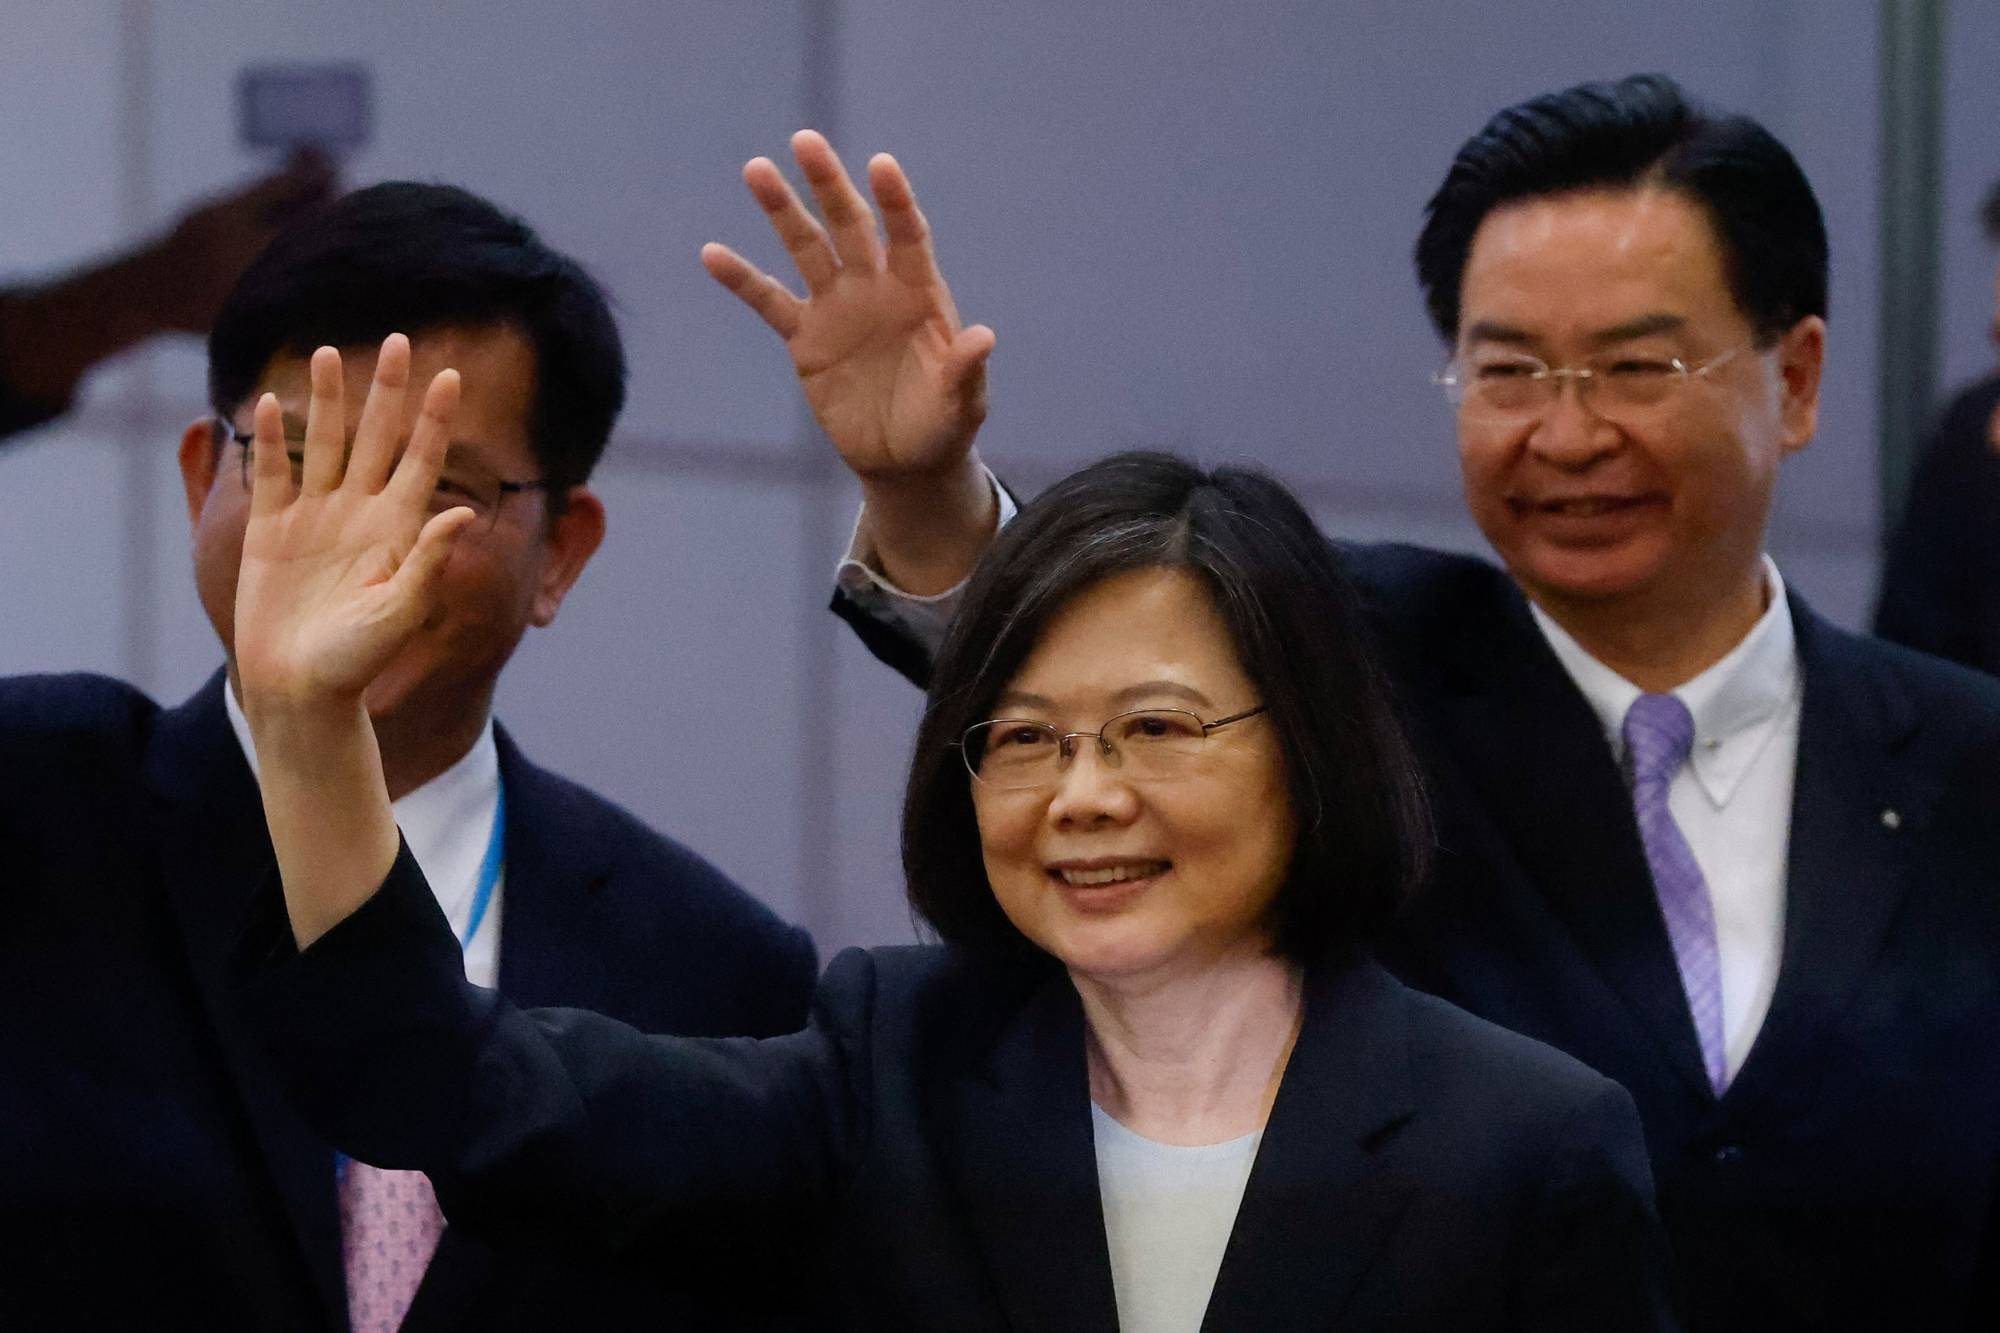 Taiwanese President Tsai Ing-wen waves to the media before her departure to New York to start her trip to Guatemala and Belize at Taoyuan International Airport in Taoyuan, Taiwan, on Wednesday. | REUTERS